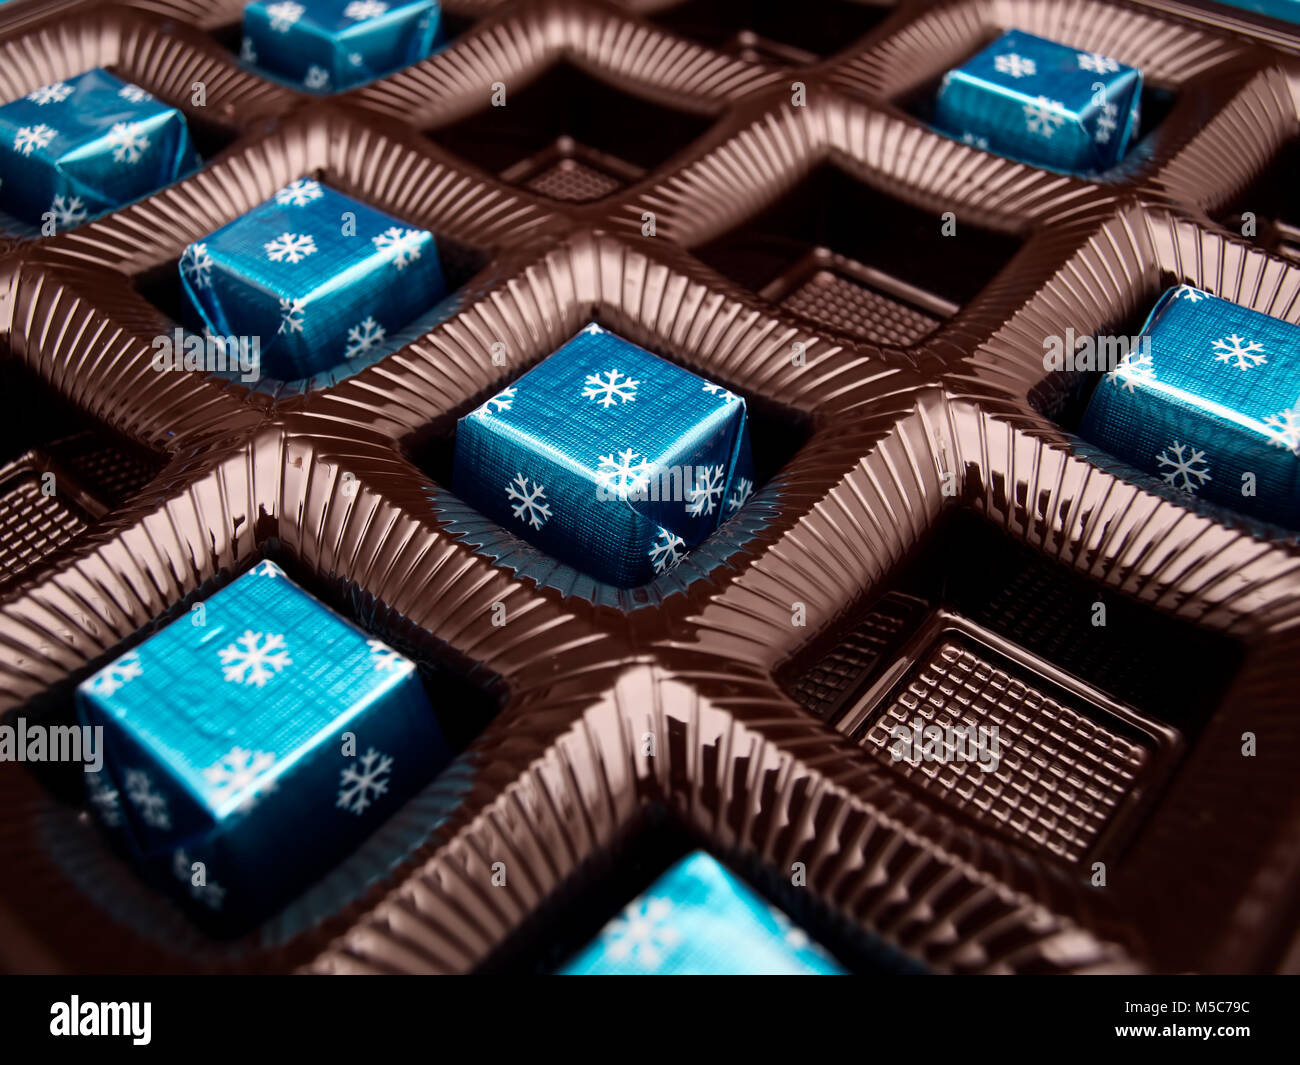 Box with chocolate candies in a blue wrap. Stock Photo